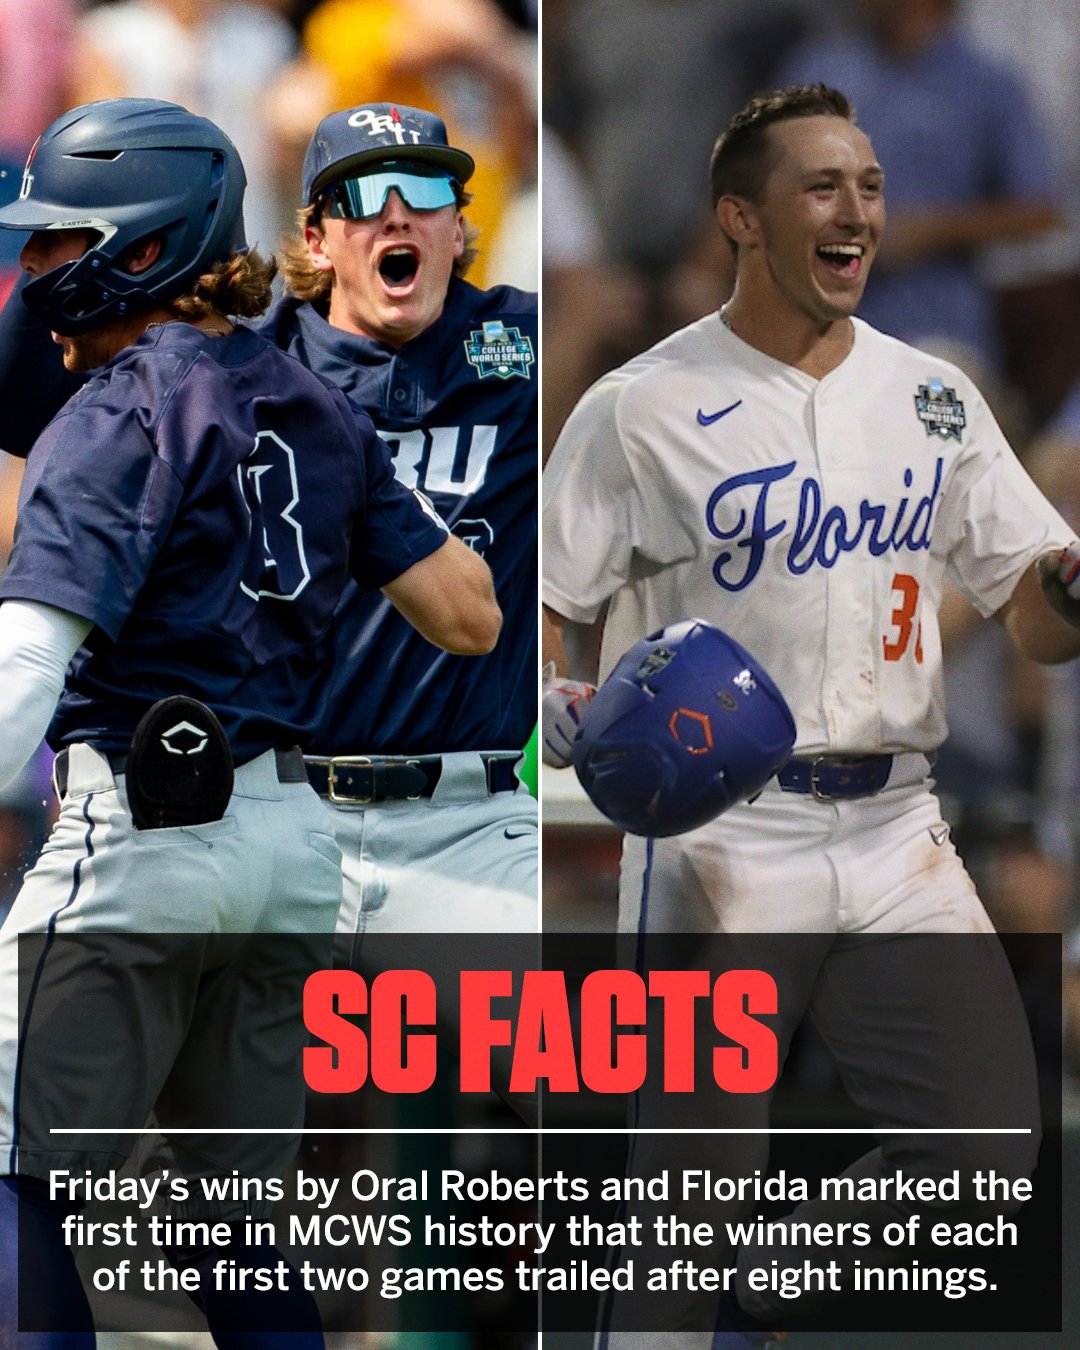 World Series - Founding, Facts & Games